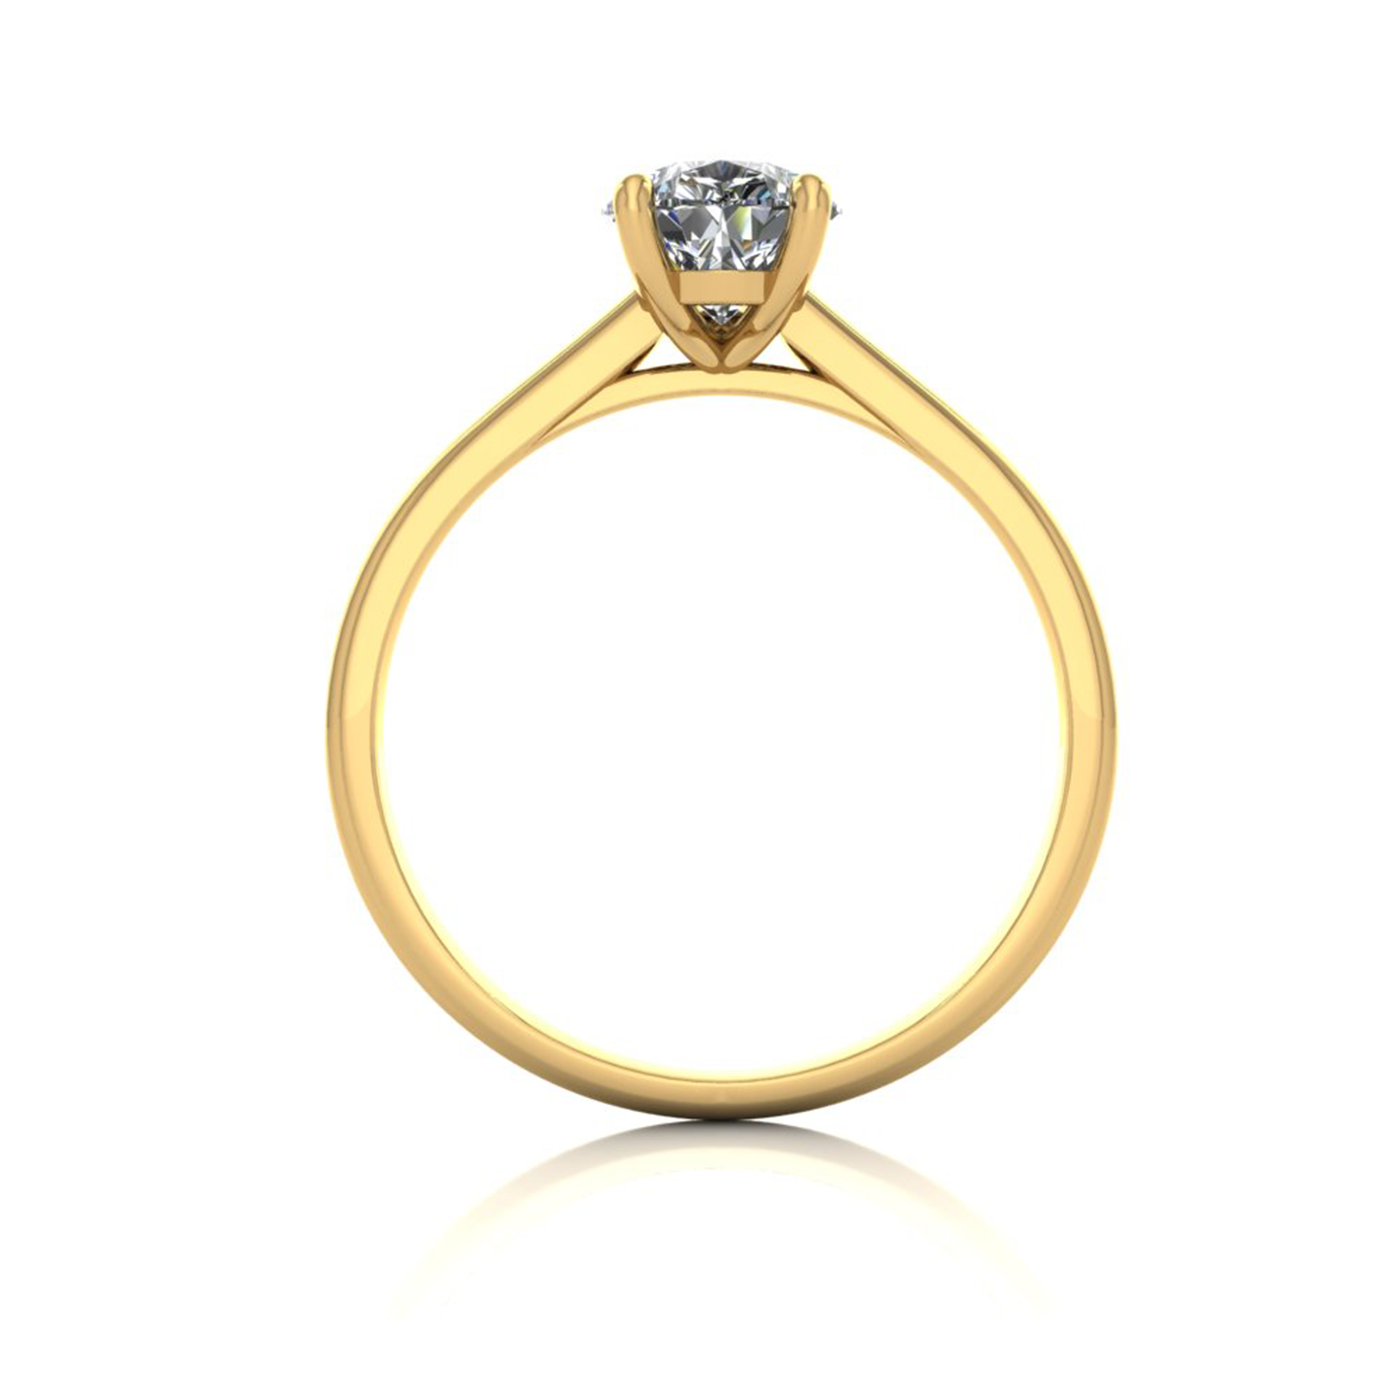 18k yellow gold  1,20 ct 3 prongs solitaire pear cut diamond engagement ring with whisper thin band